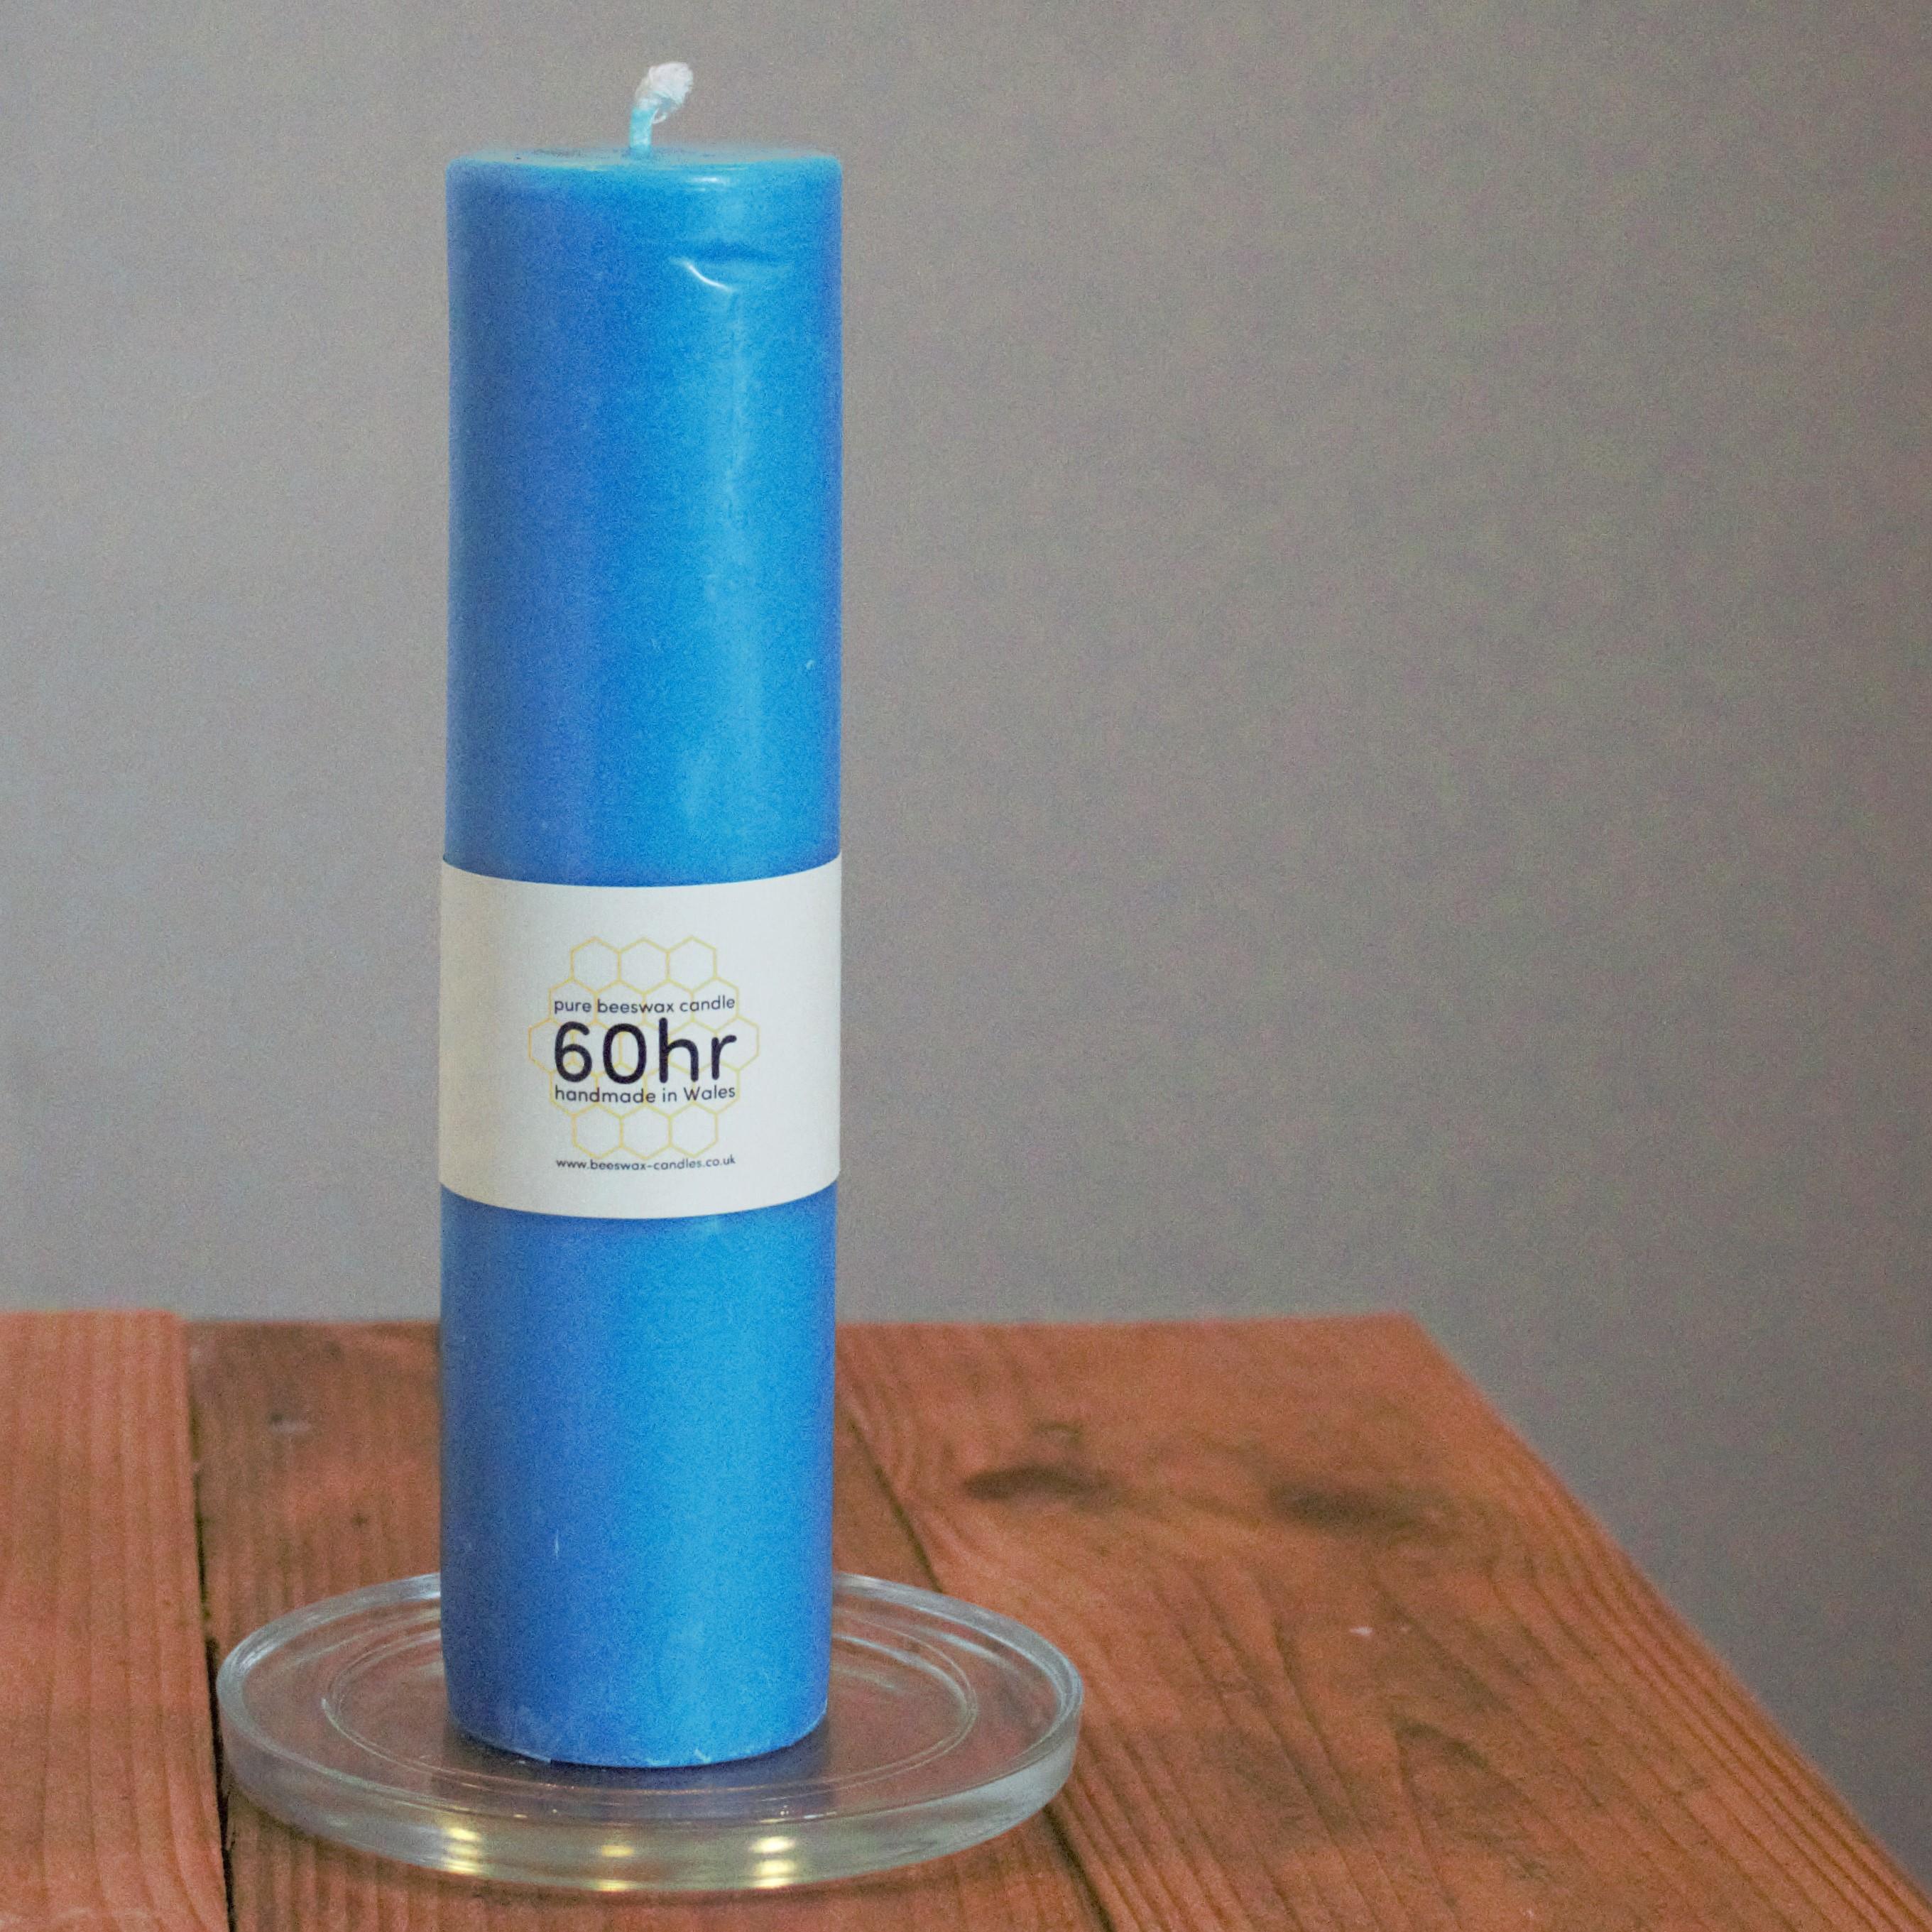 Sea Blue 60hr pure beeswax pillar candle